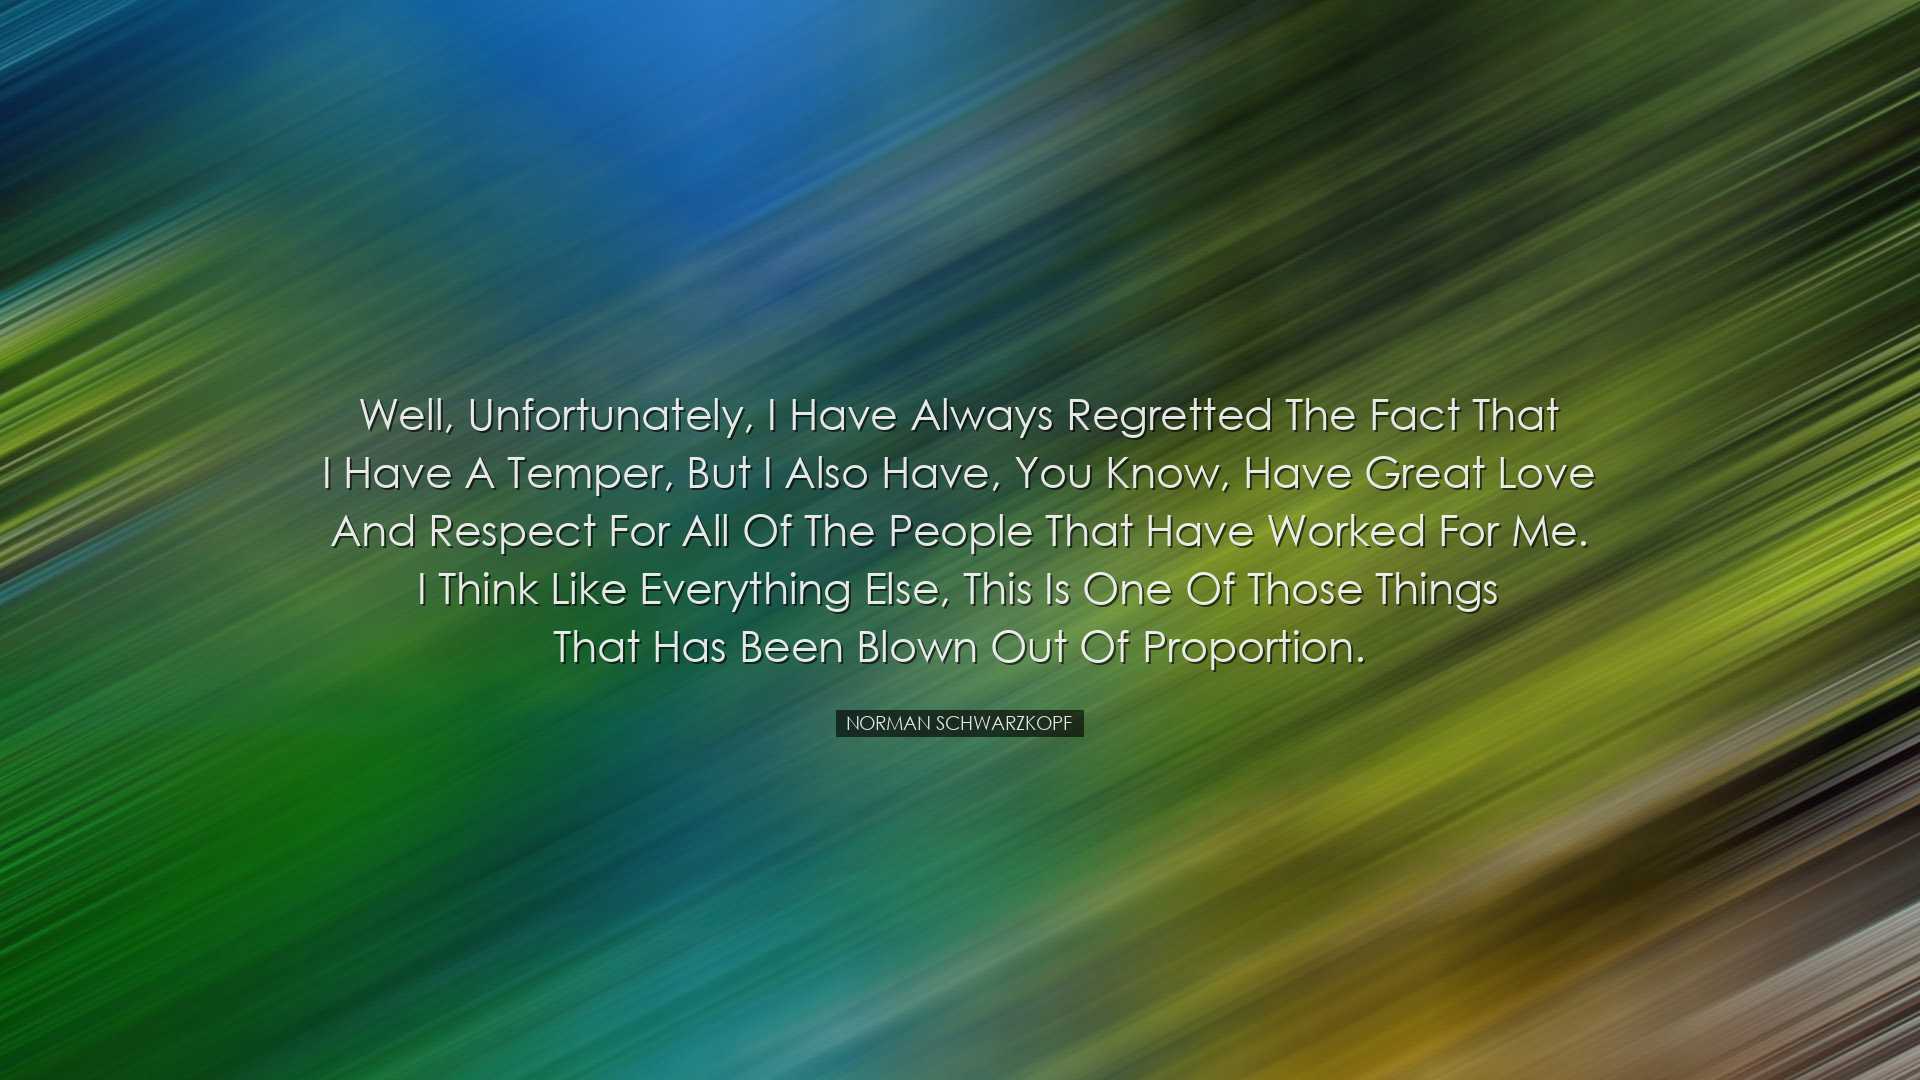 Well, unfortunately, I have always regretted the fact that I have